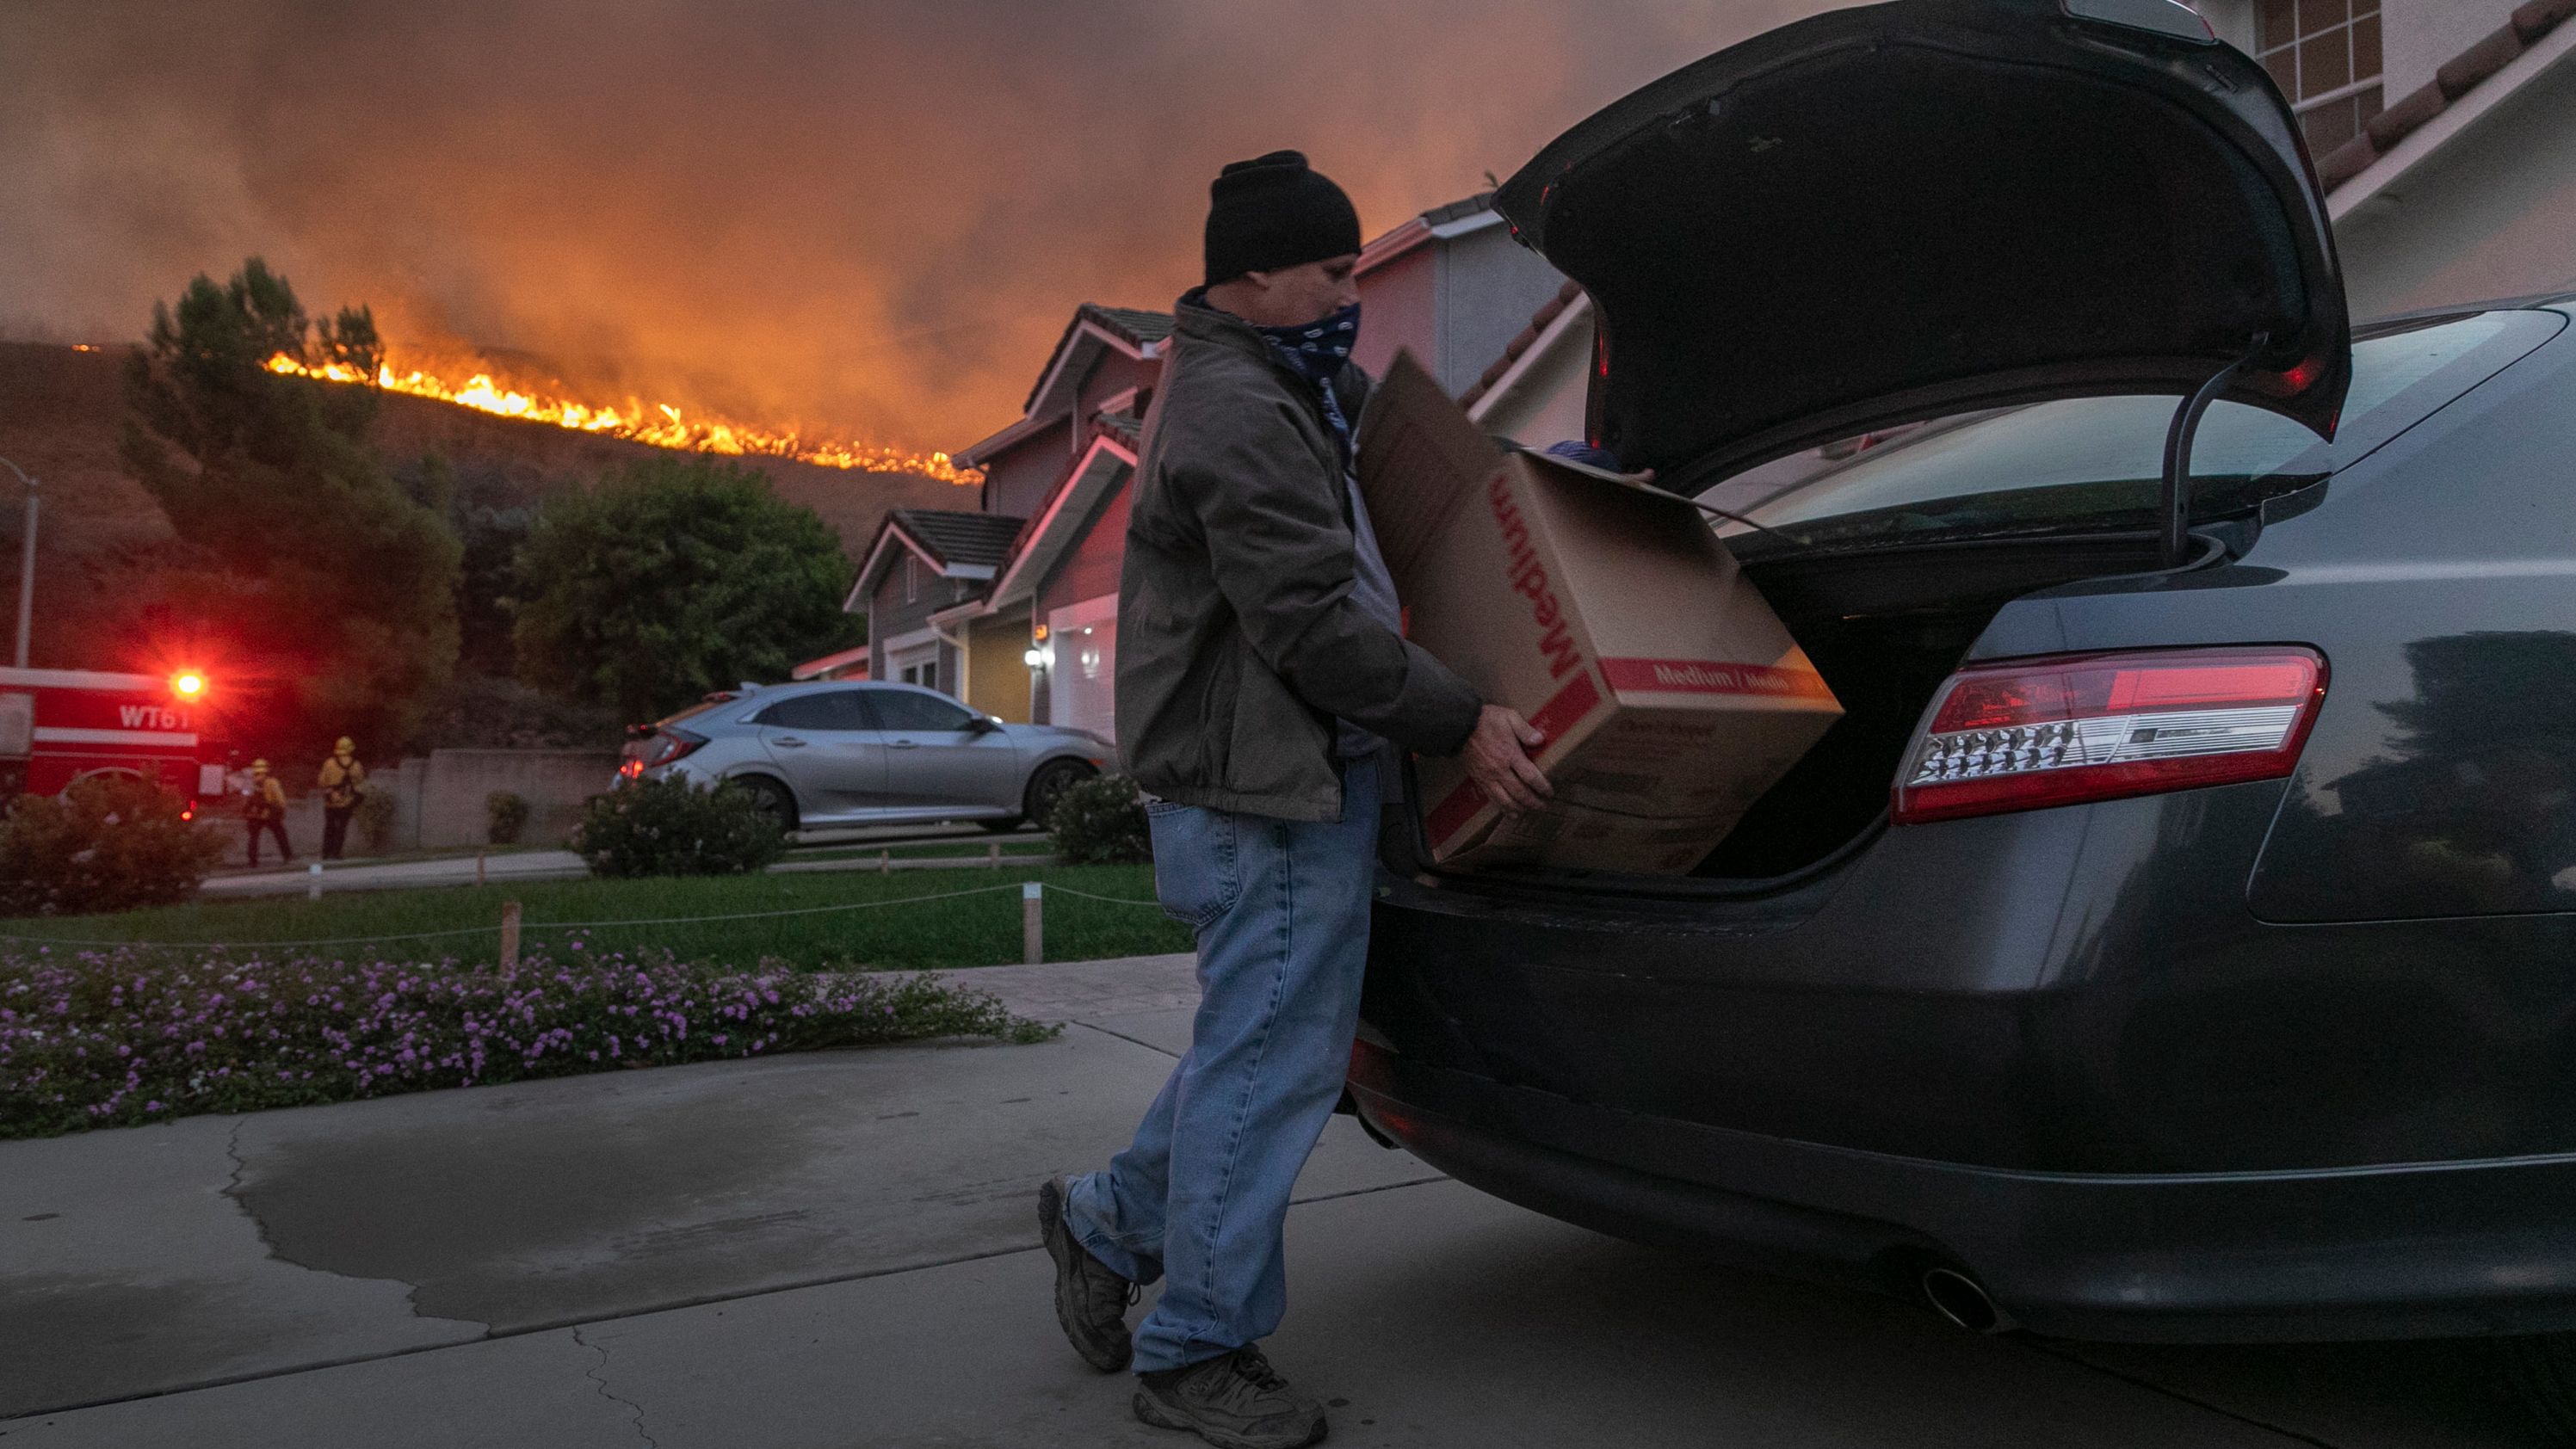 A man evacuates his home as flames from the Blue Ridge Fire approach in Chino Hills, California, on Tuesday, October 27, 2020.